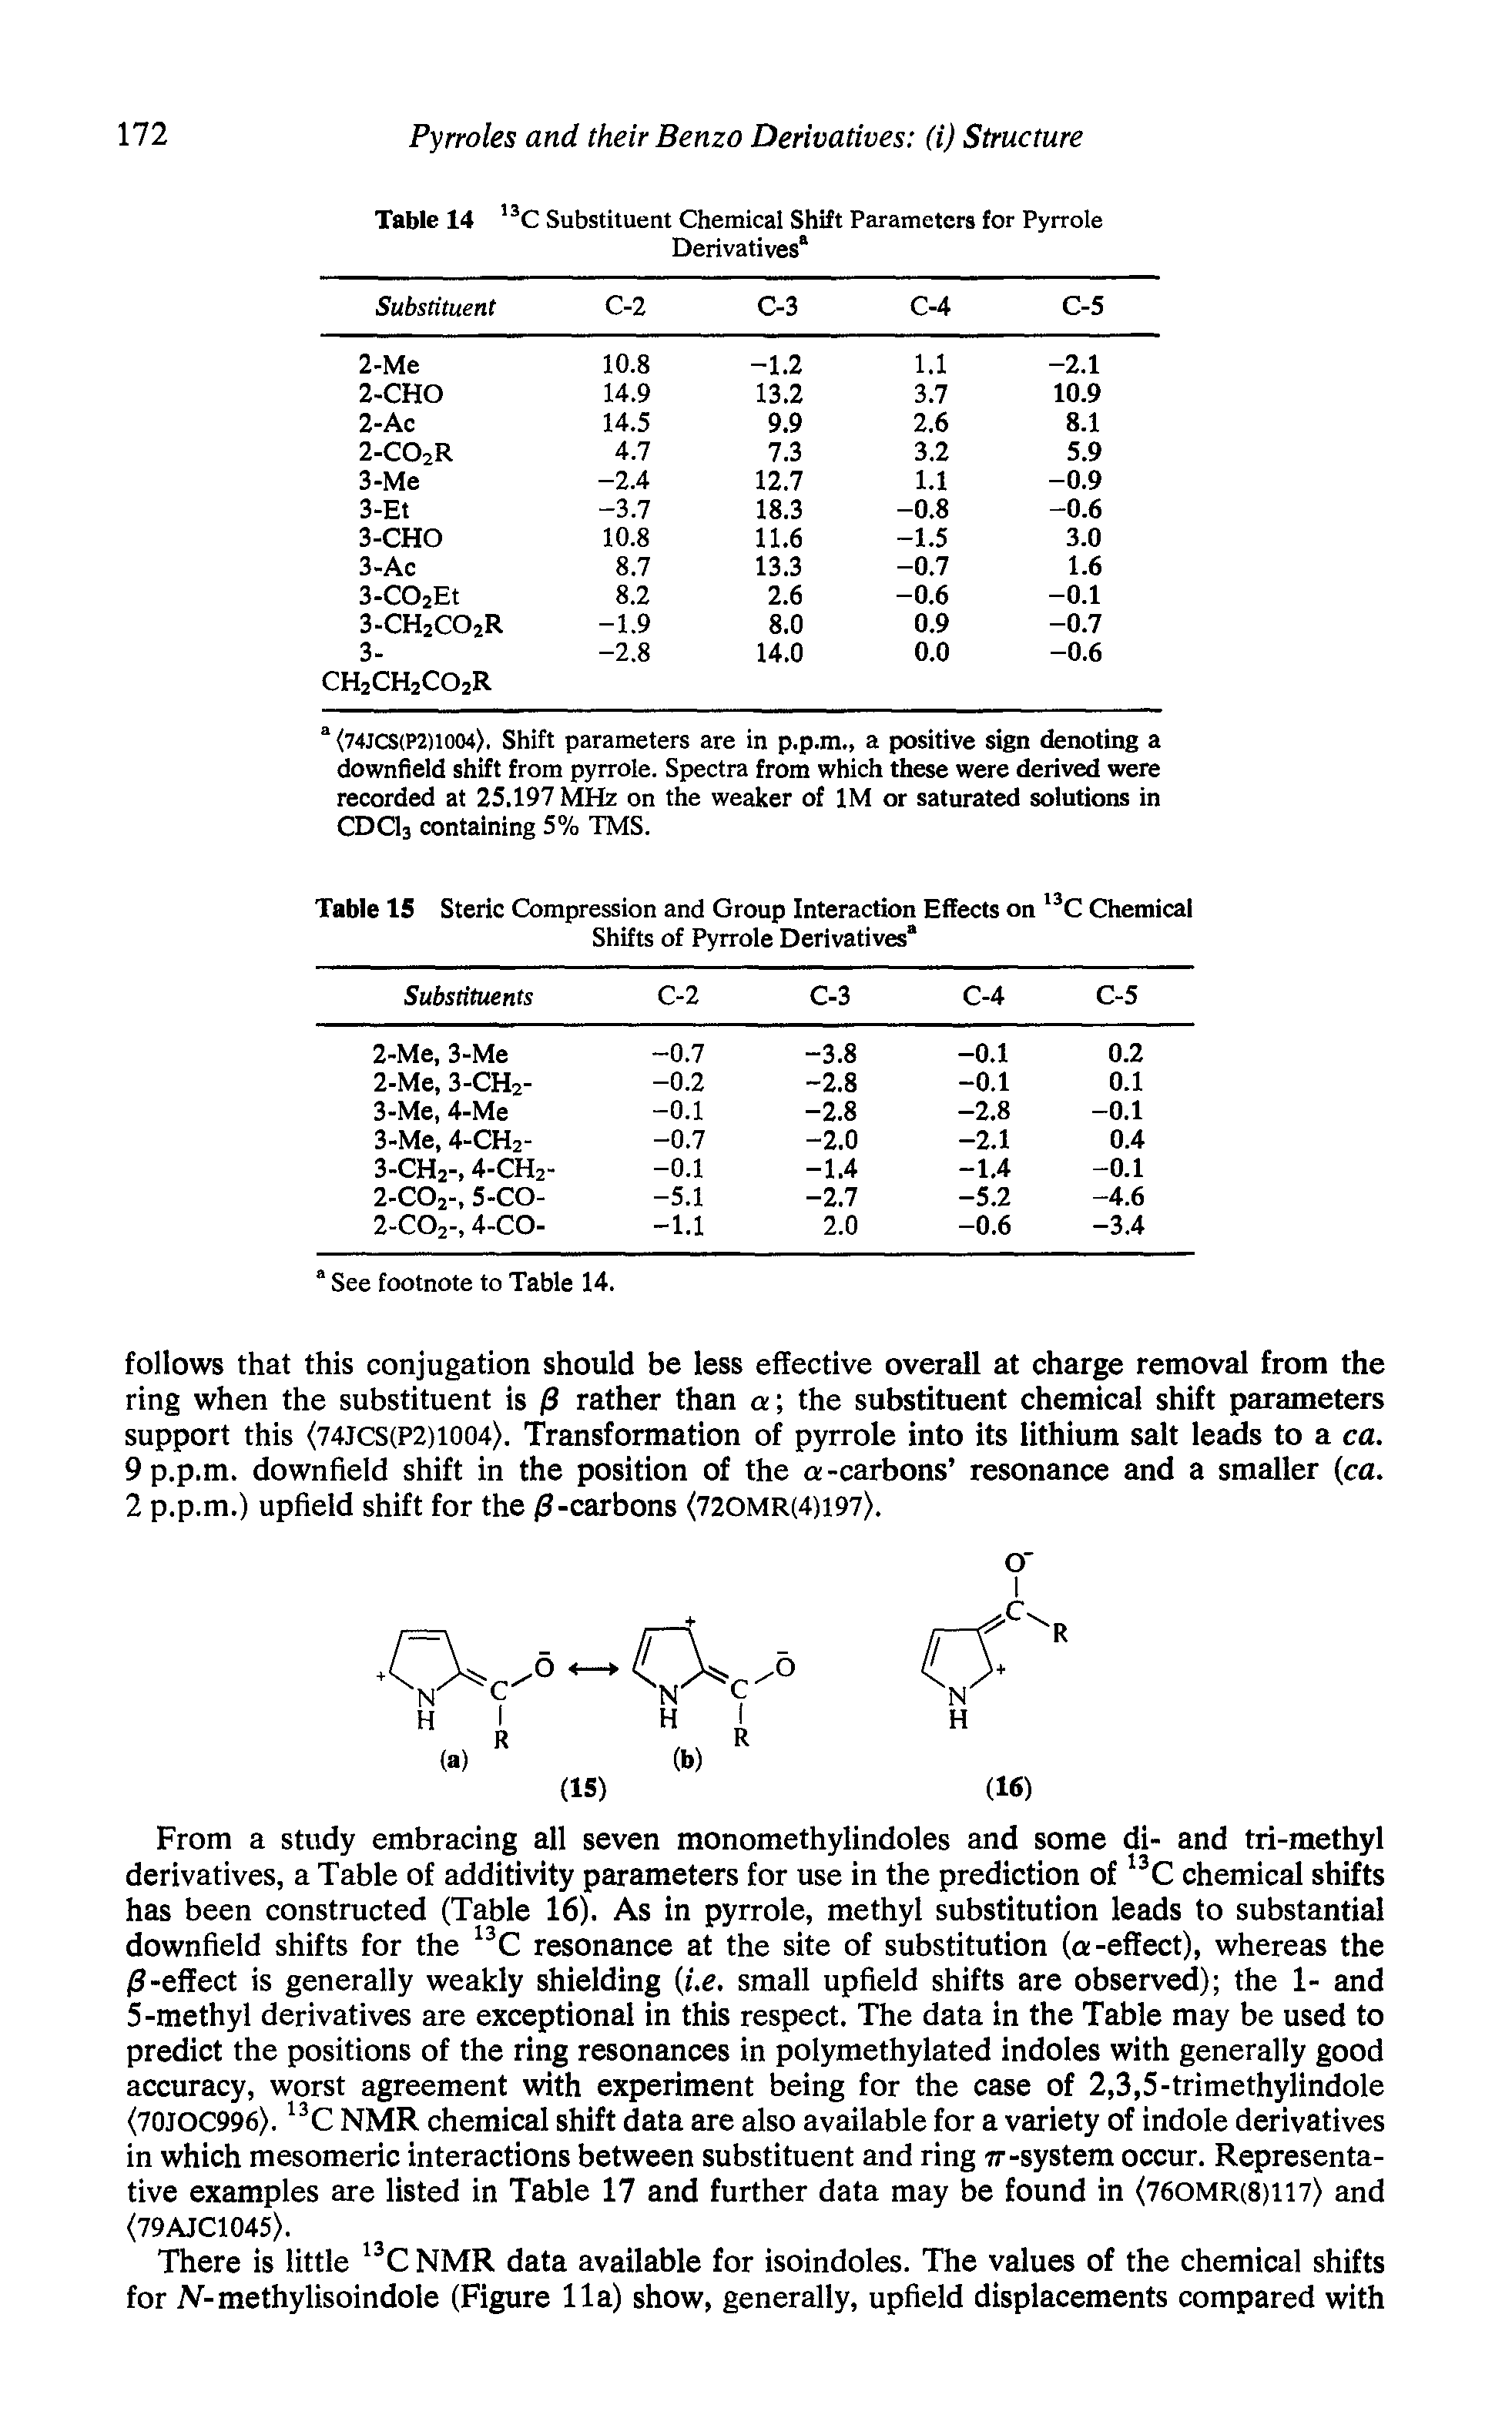 Table 14 13C Substituent Chemical Shift Parameters for Pyrrole Derivatives 1...